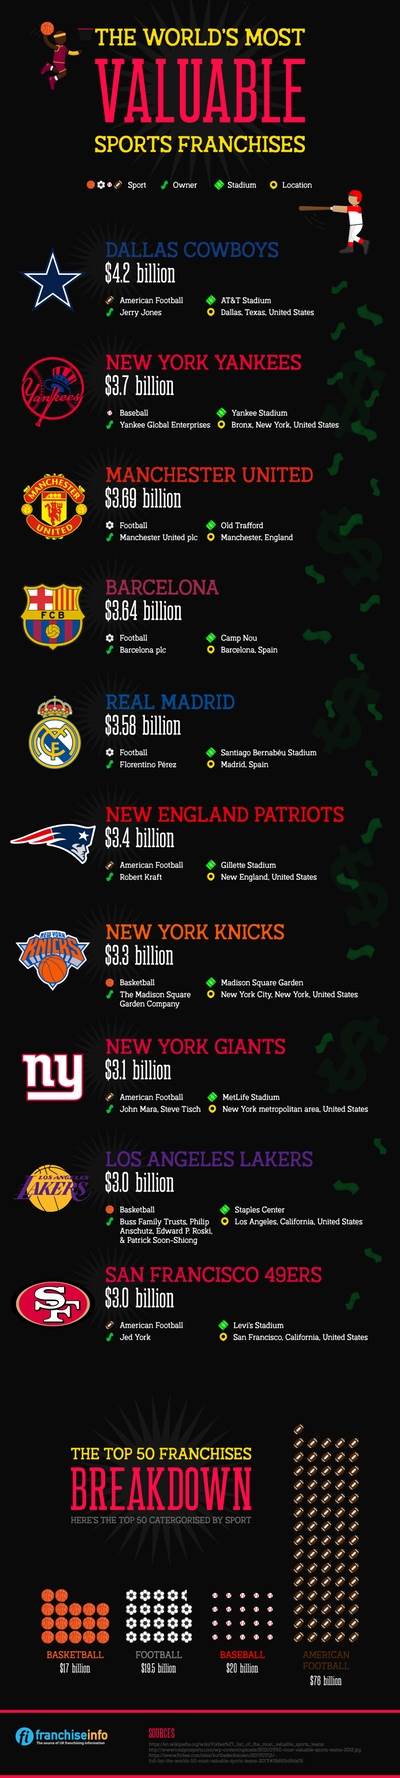 The World's most valuable sports franchises